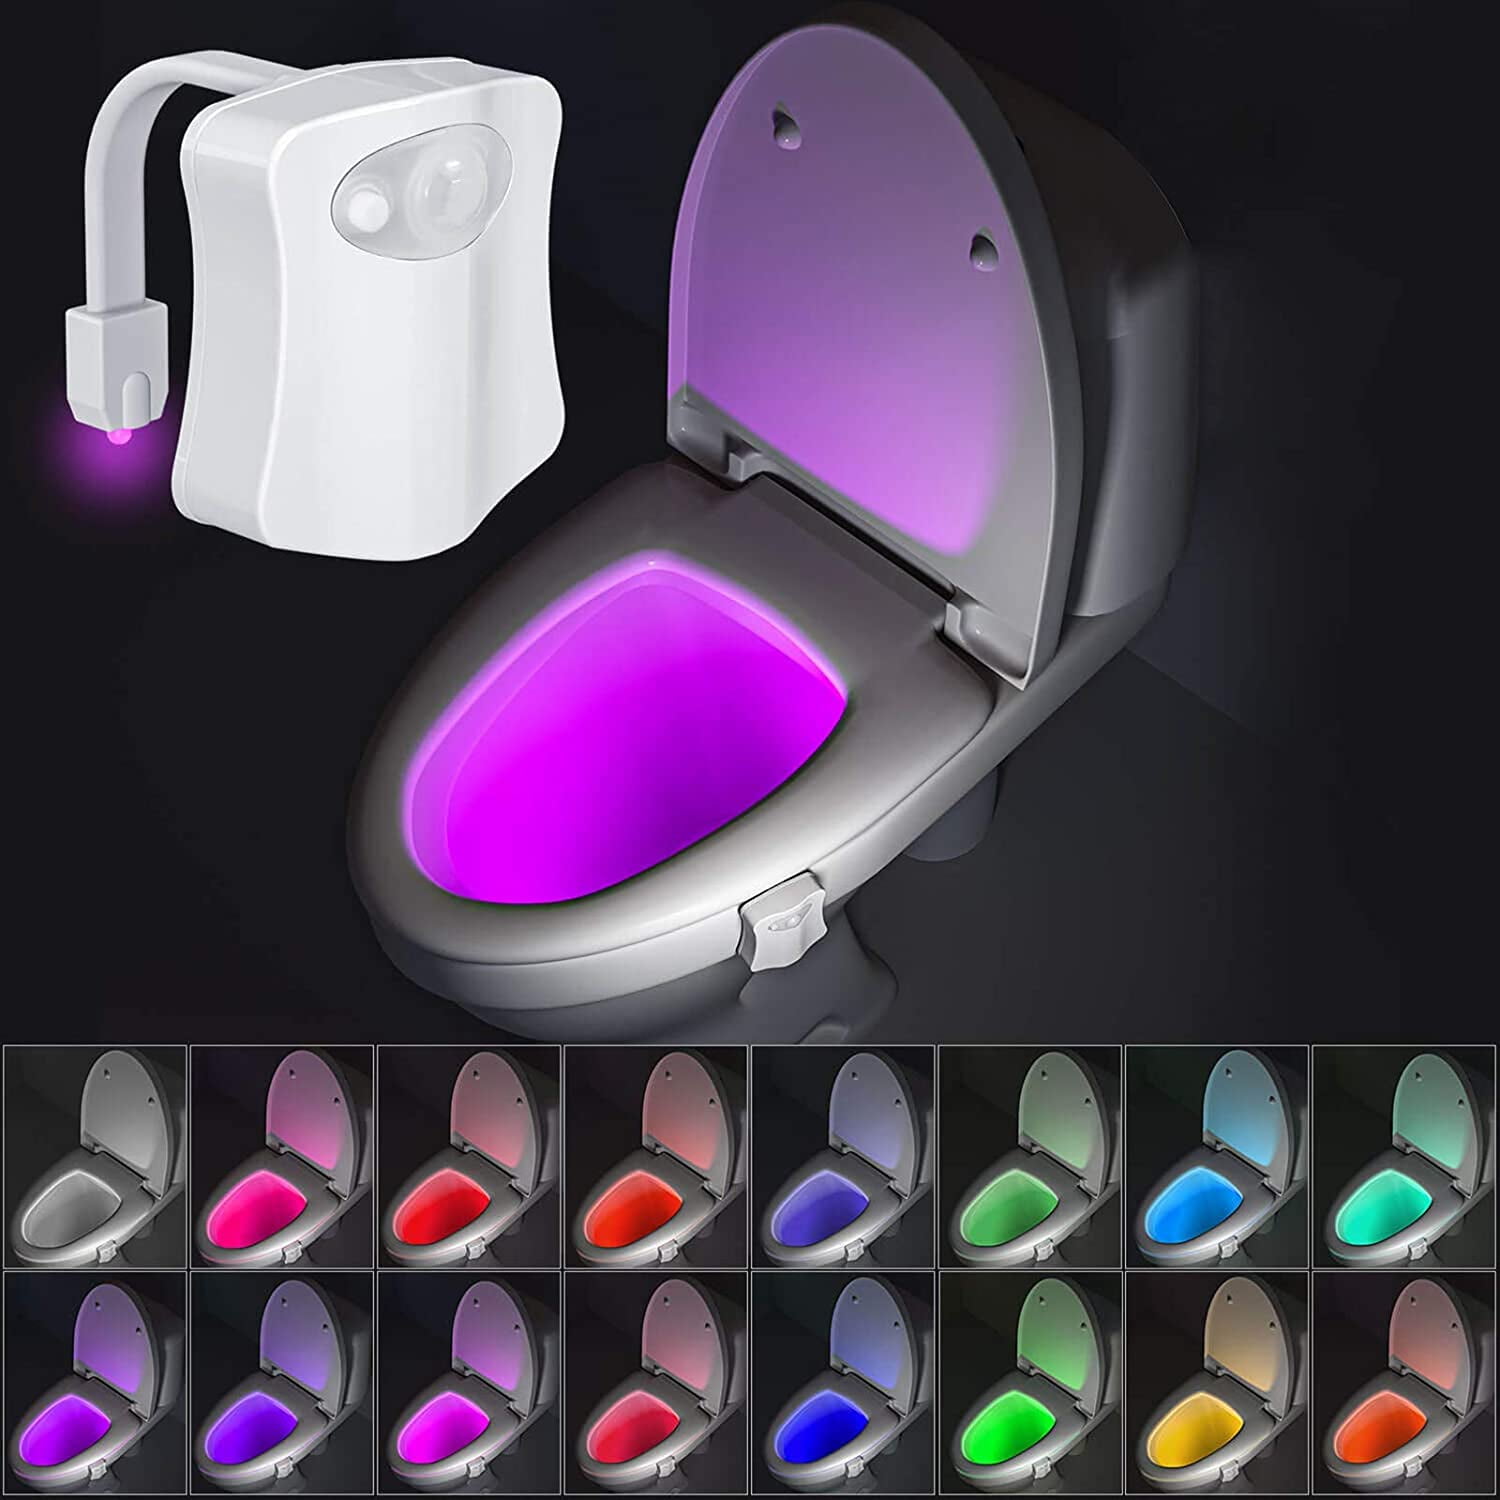 1/2Pack Toilet Night Light 8 Colors Changing LED Automatic PIR